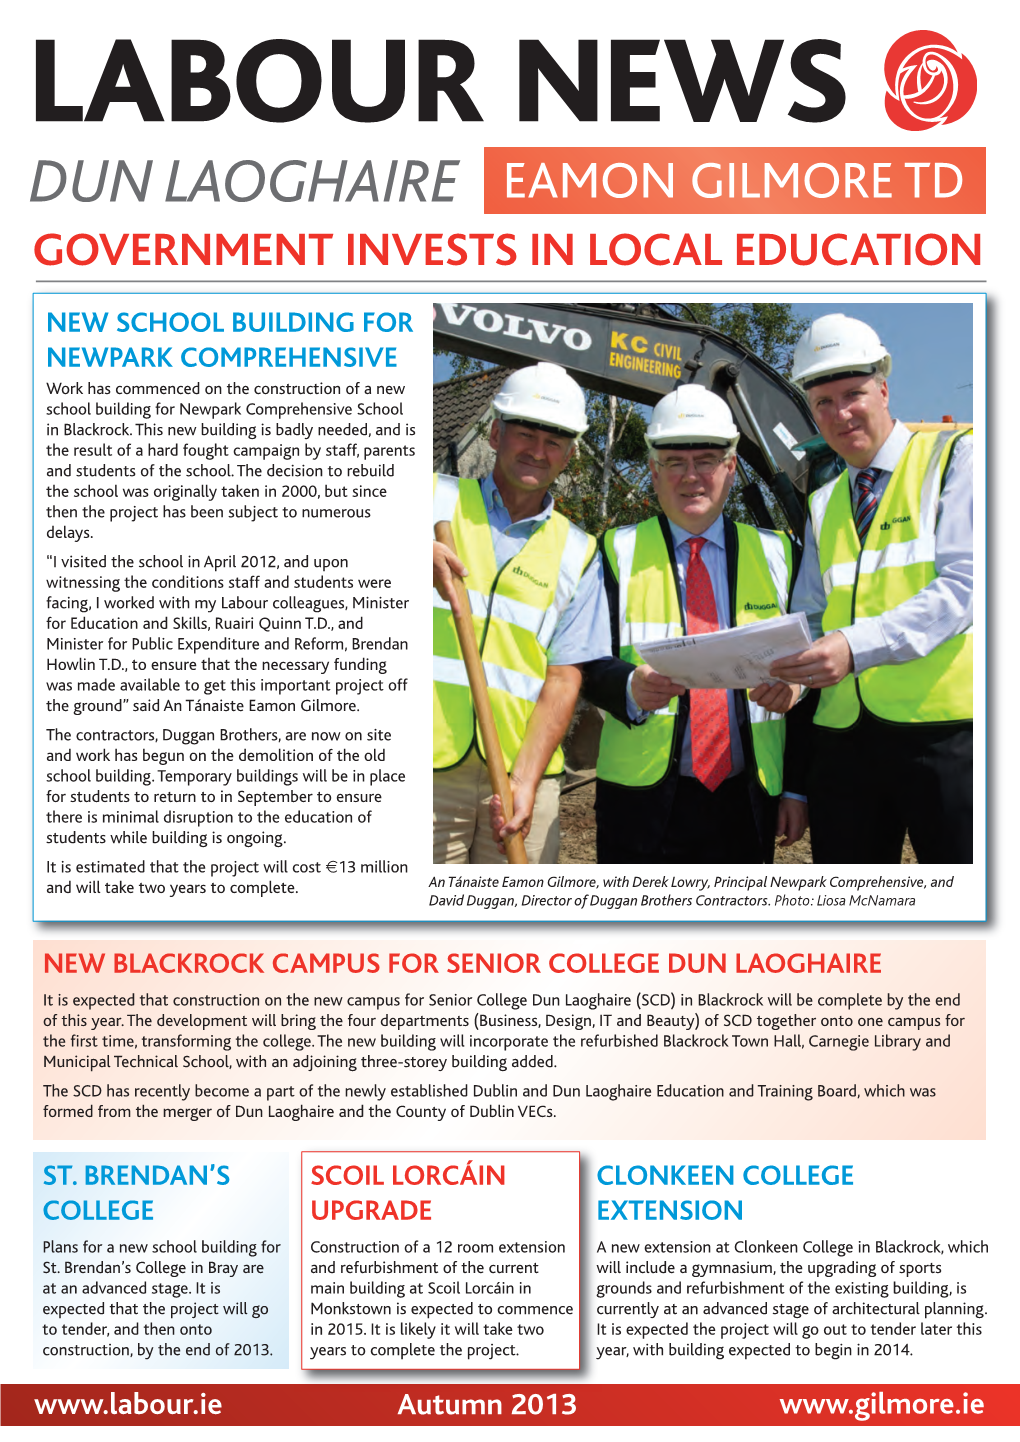 Dun Laoghaire Eamon Gilmore Td Government Invests in Local Education